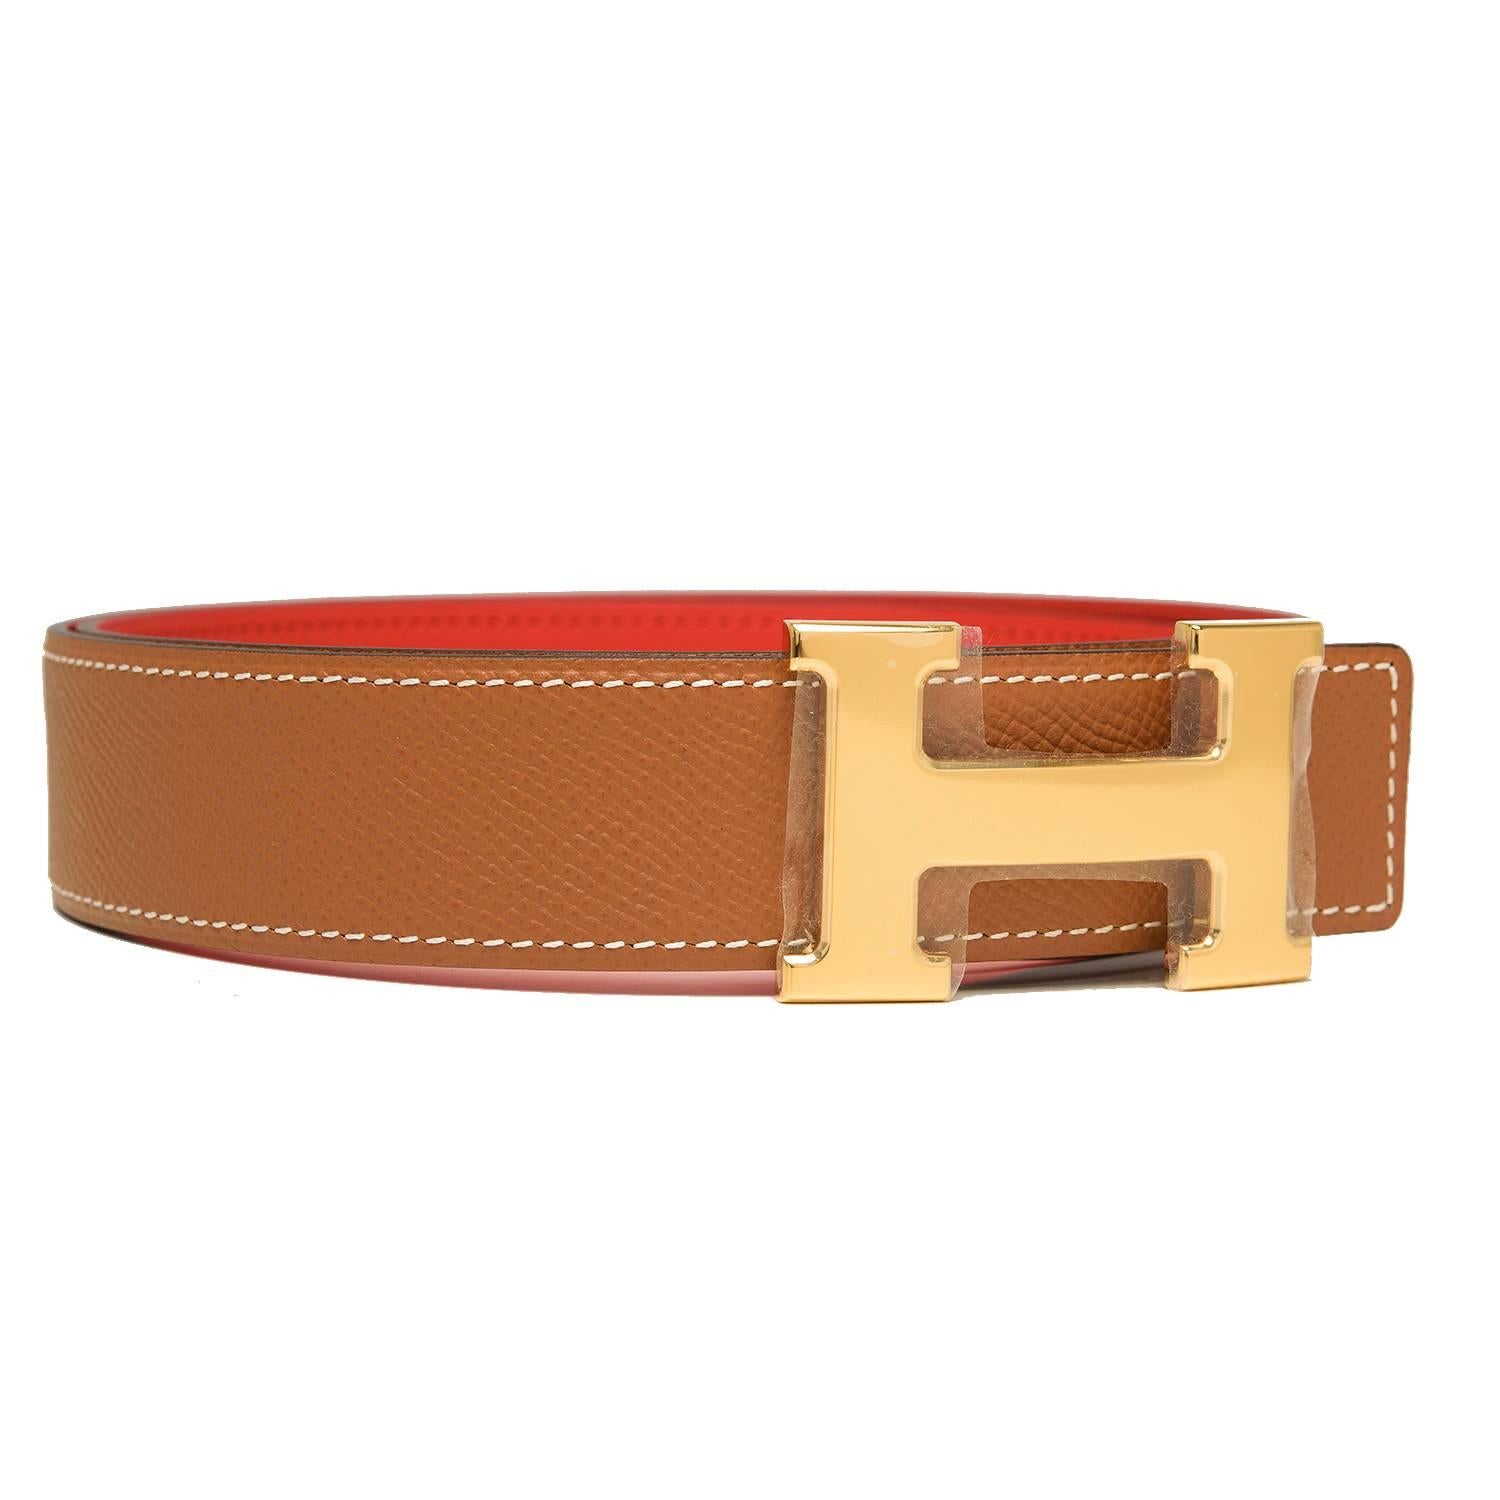 Hermes belt kit comprising an adjustable wide 32mm Constance H belt of Rouge Grenat evercolor with tonal stitching reversing to Gold epsom with contrast white stitching accompanied by a removable gold plated H buckle.

Origin: France

Condition: